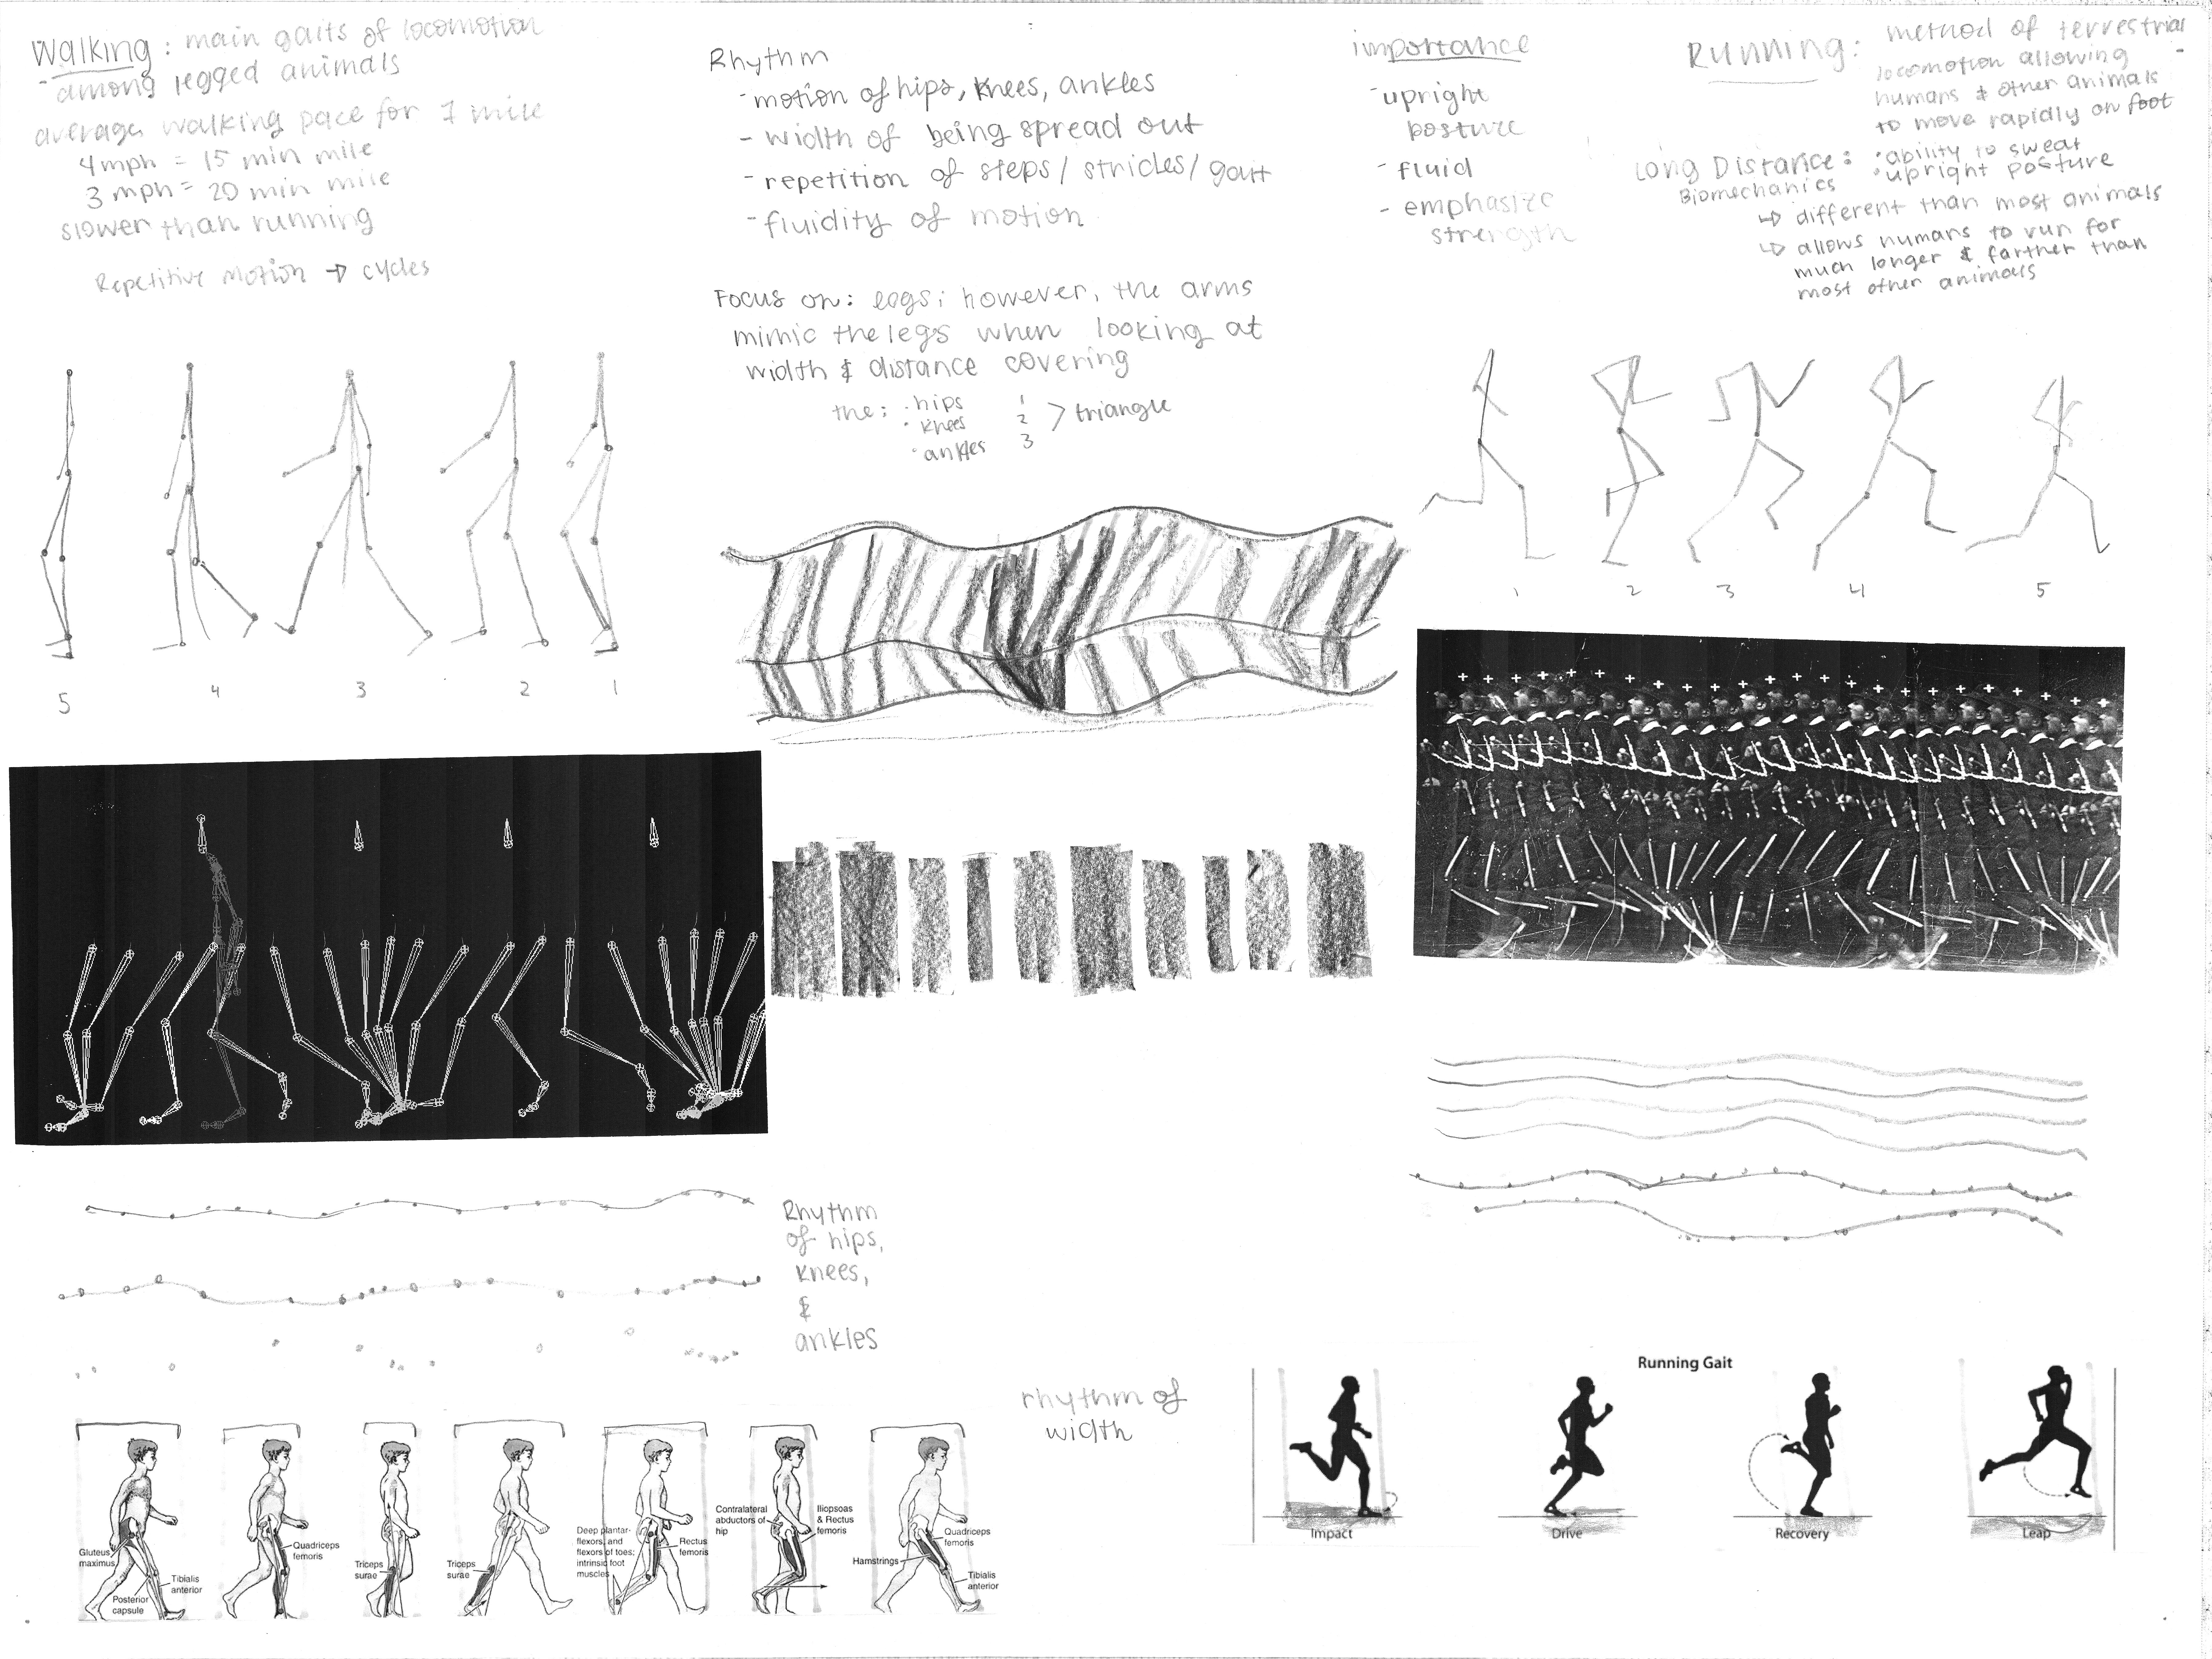 image of student work research drawing by willig